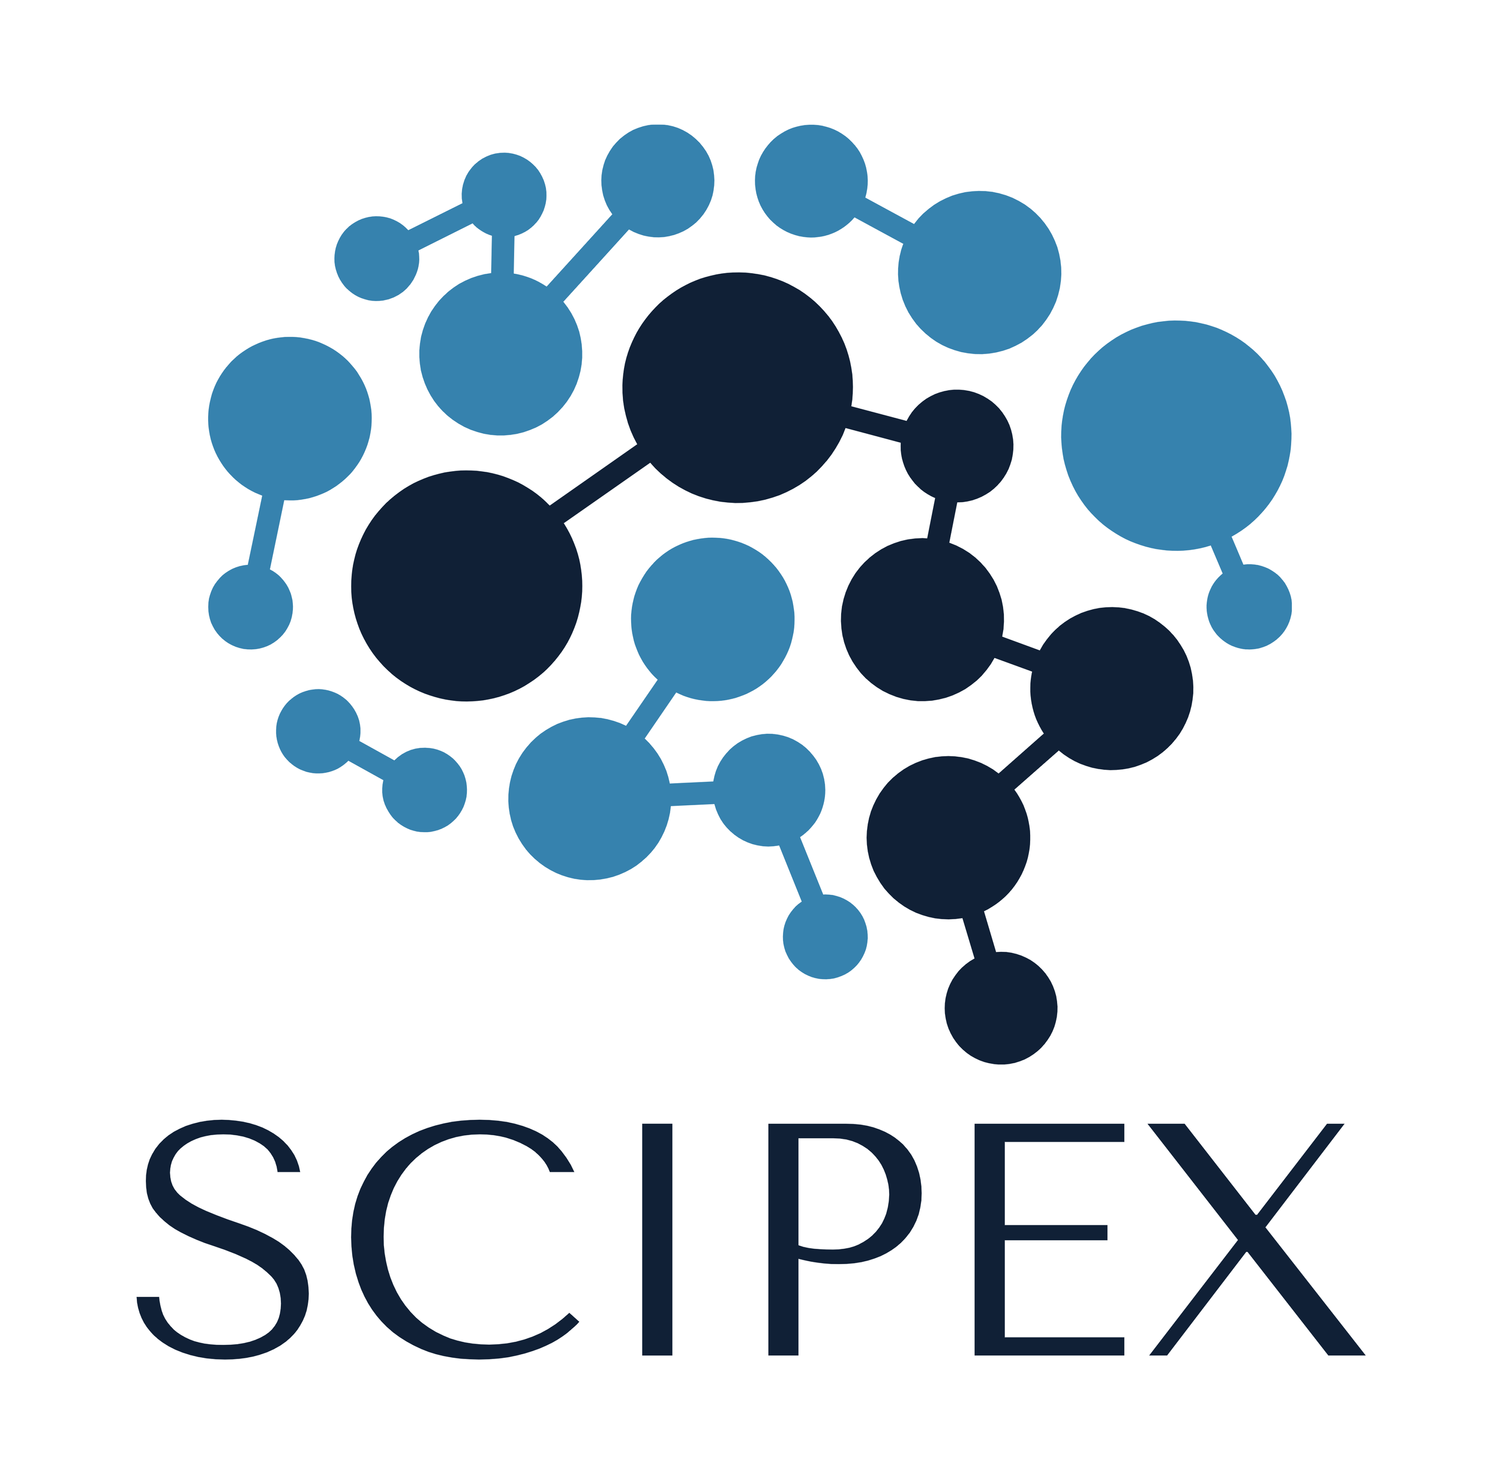 Scipex - Your Trusted Toxicology Partner